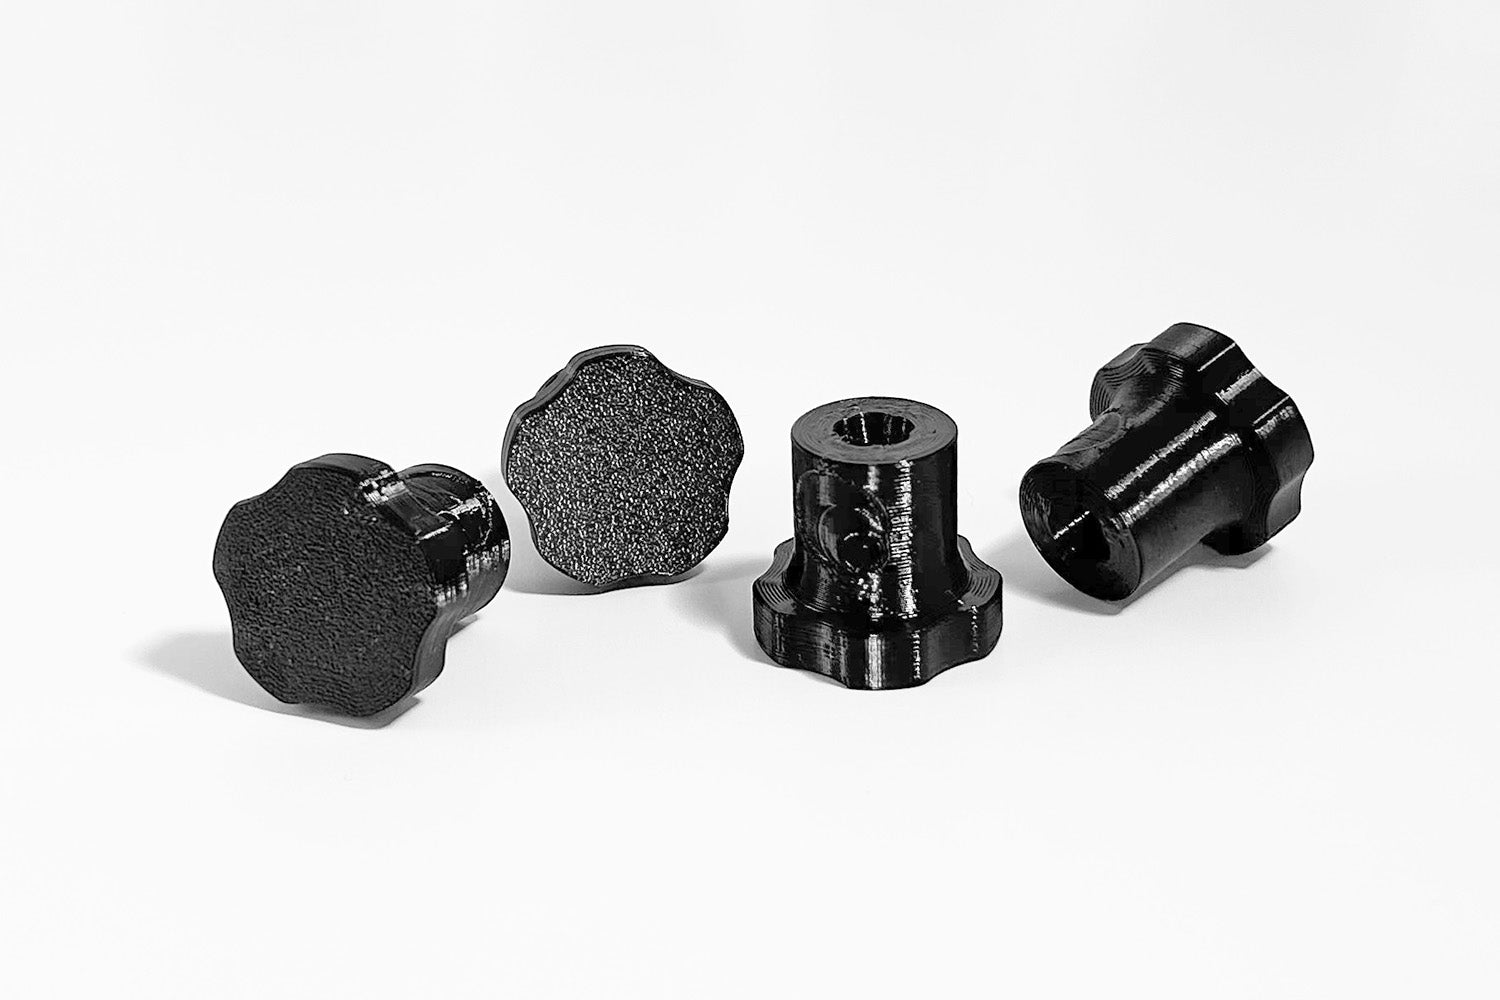 Sold in pair, our Brake Caliper Bolt Holders are compatible with all M5 and M6 caliper bolts and are made of thermoplastic elastomer material